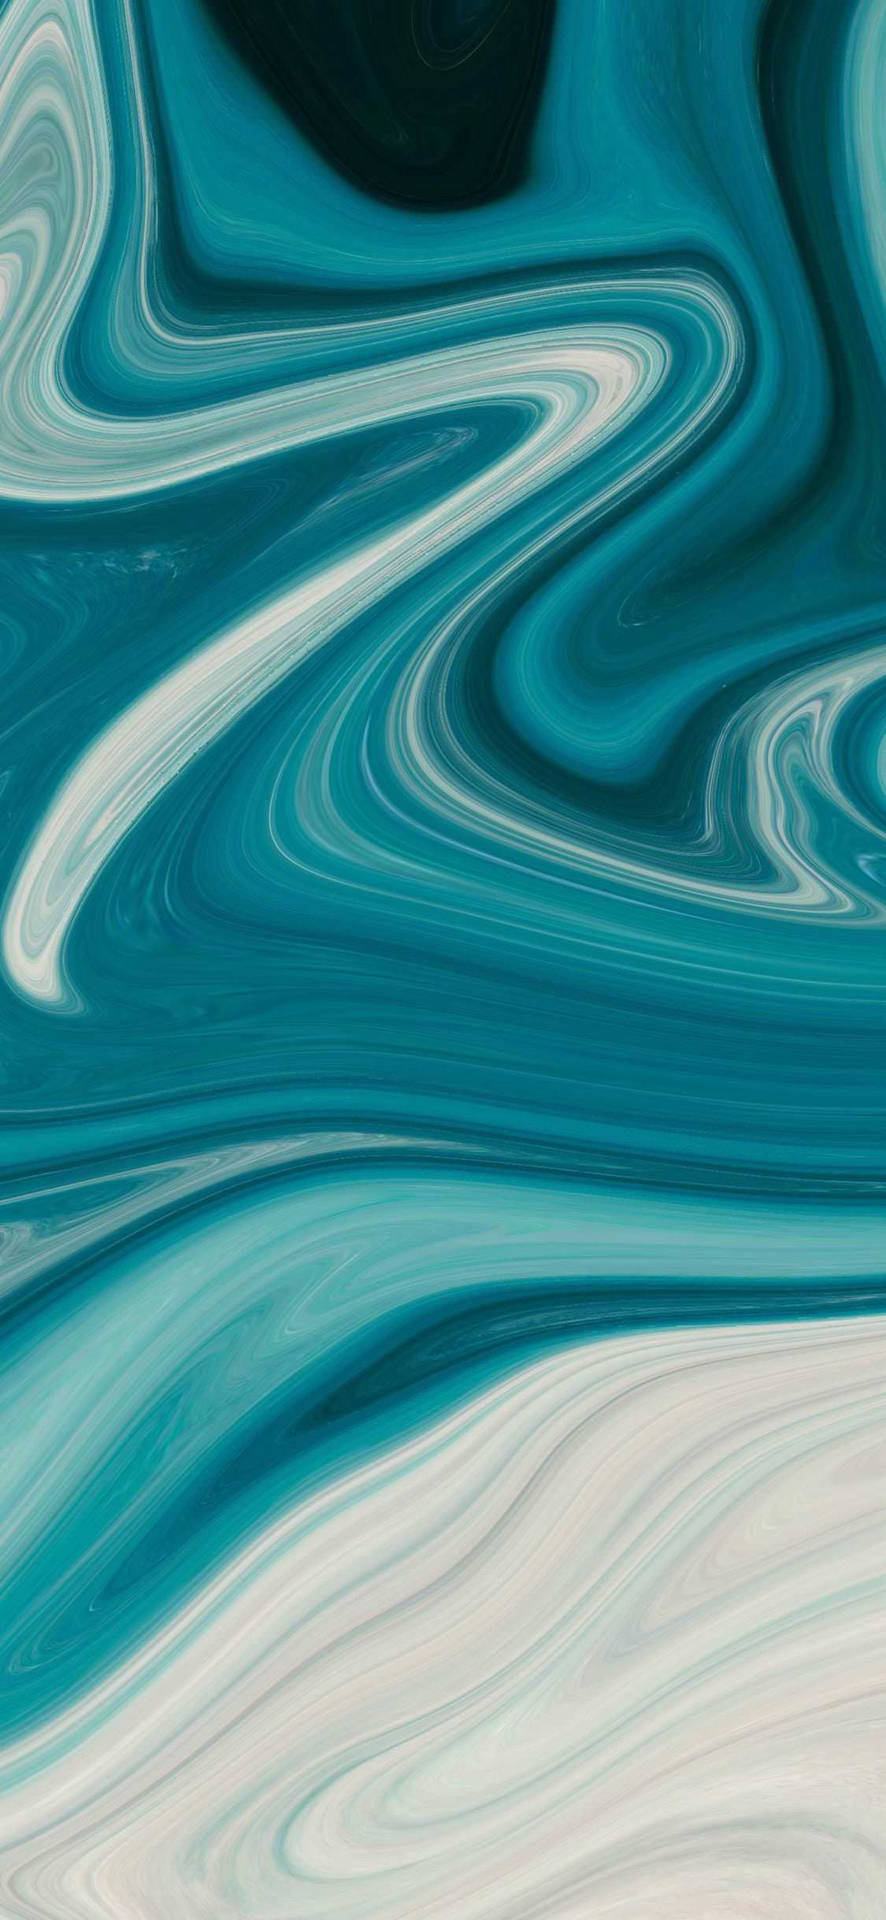 Download Abstract Painting Ios 12 Wallpaper 